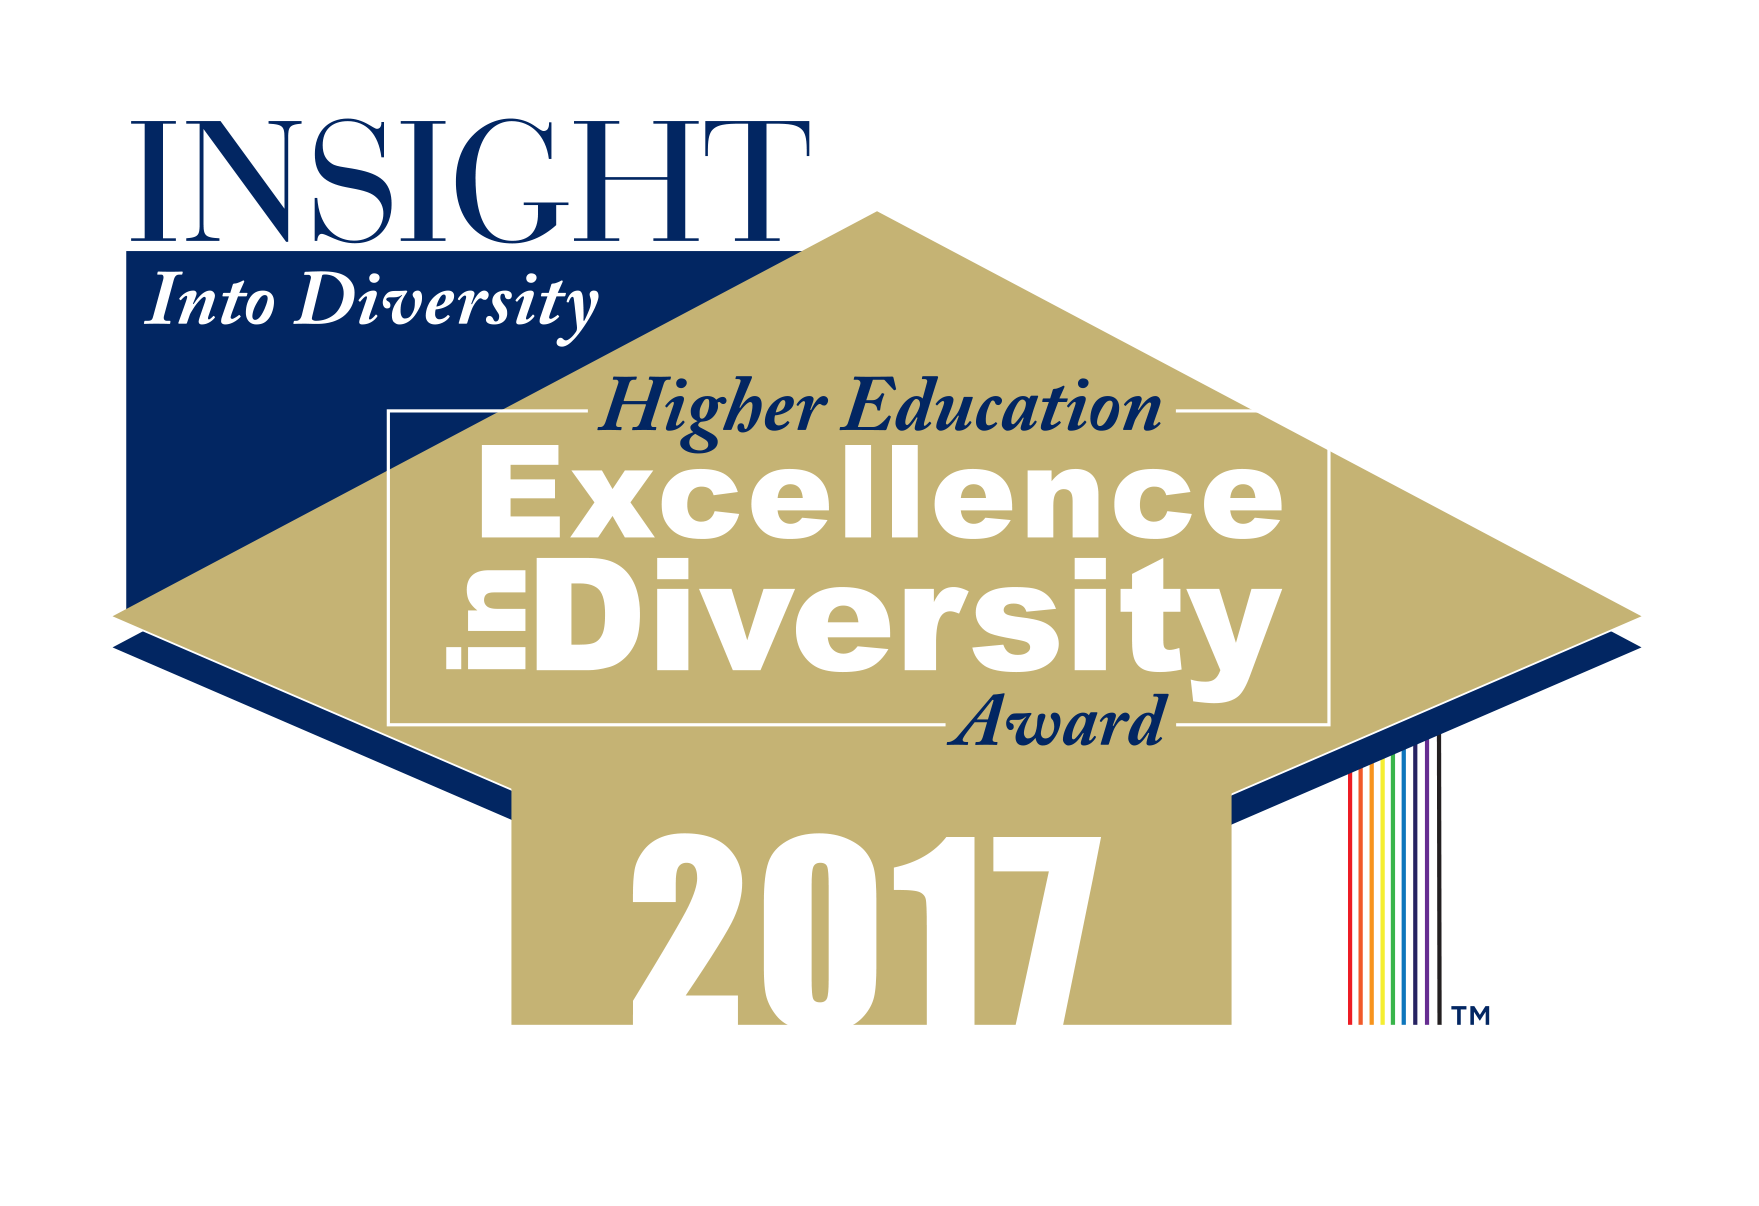 Institute Diversity is proud to announce that INSIGHT Into Diversity honored Georgia Tech with the 2017 INSIGHT Into Diversity Higher Education Excellence in Diversity Award for the fourth consecutive year. Georgia Tech is being recognized for its outstanding commitment to diversity, equity, and inclusion. 